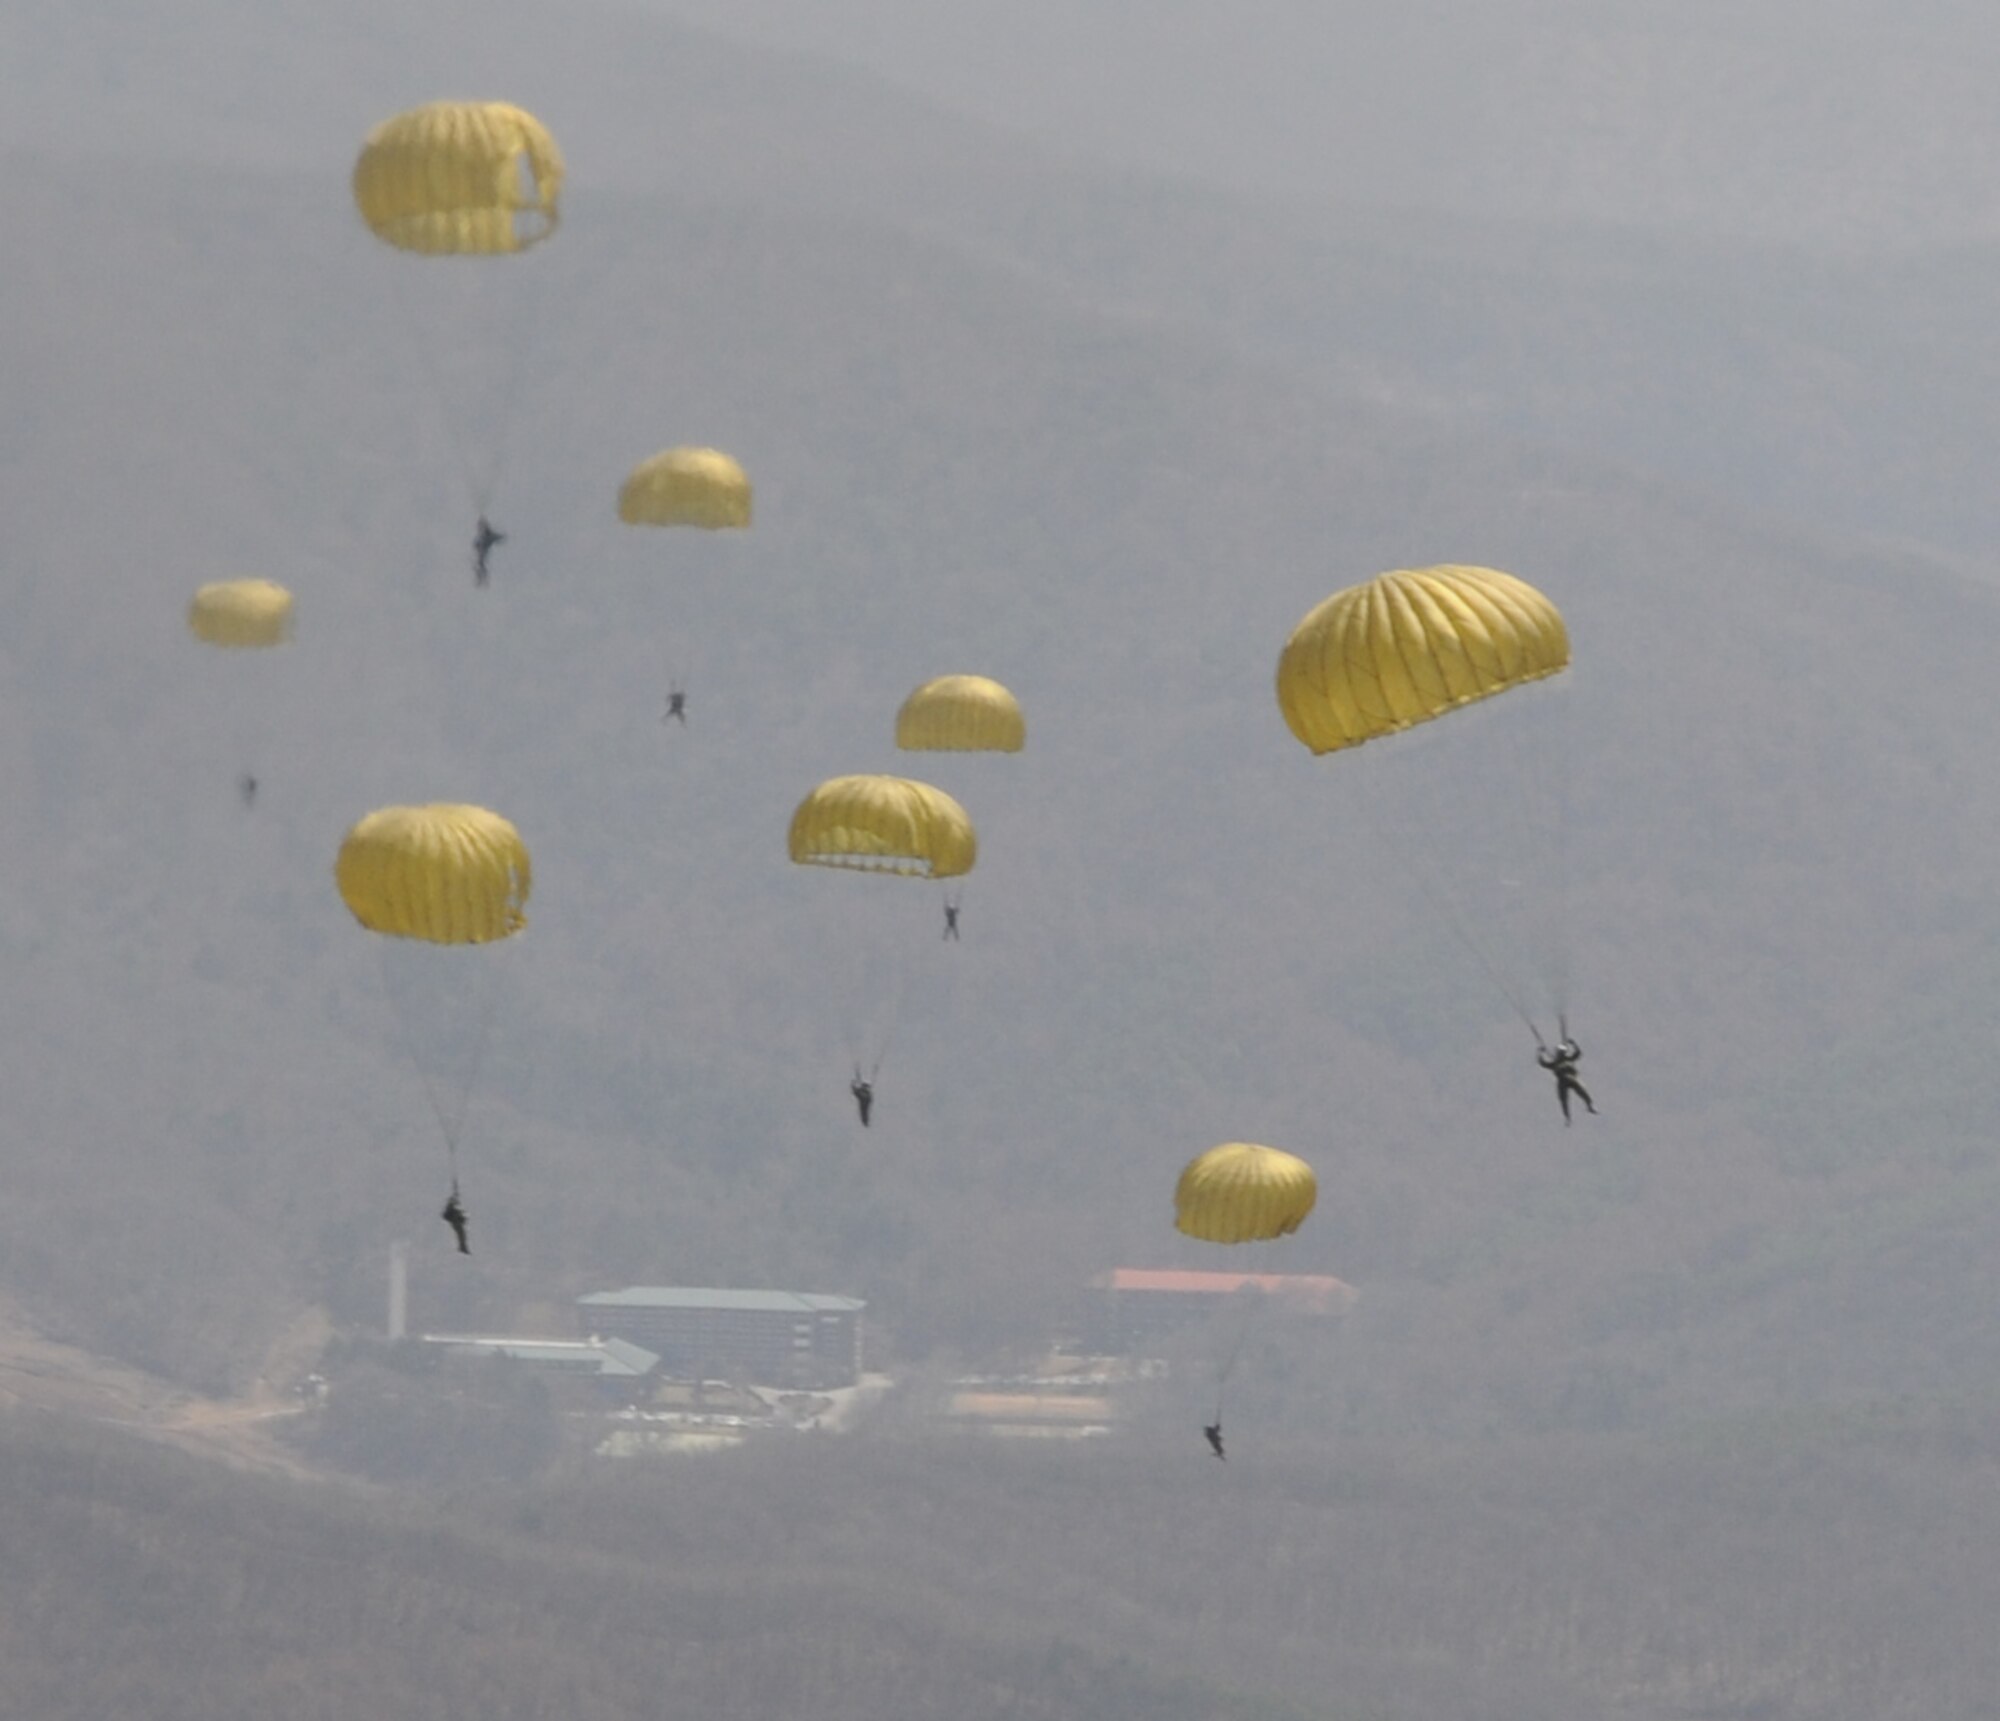 OVER MAE SAN RI, Republic of Korea -- Members of the Republic of Korea Army glide to the ground after a static-line airdrop from a 17th Special Operations Squadron MC-130P Combat Shadow here April 2. More than 70 U.S. and ROK Army soldiers jumped from two MC-130P's as part of a friendship jump between the two armies. (U.S. Air Force photo by Tech. Sgt. Aaron Cram)